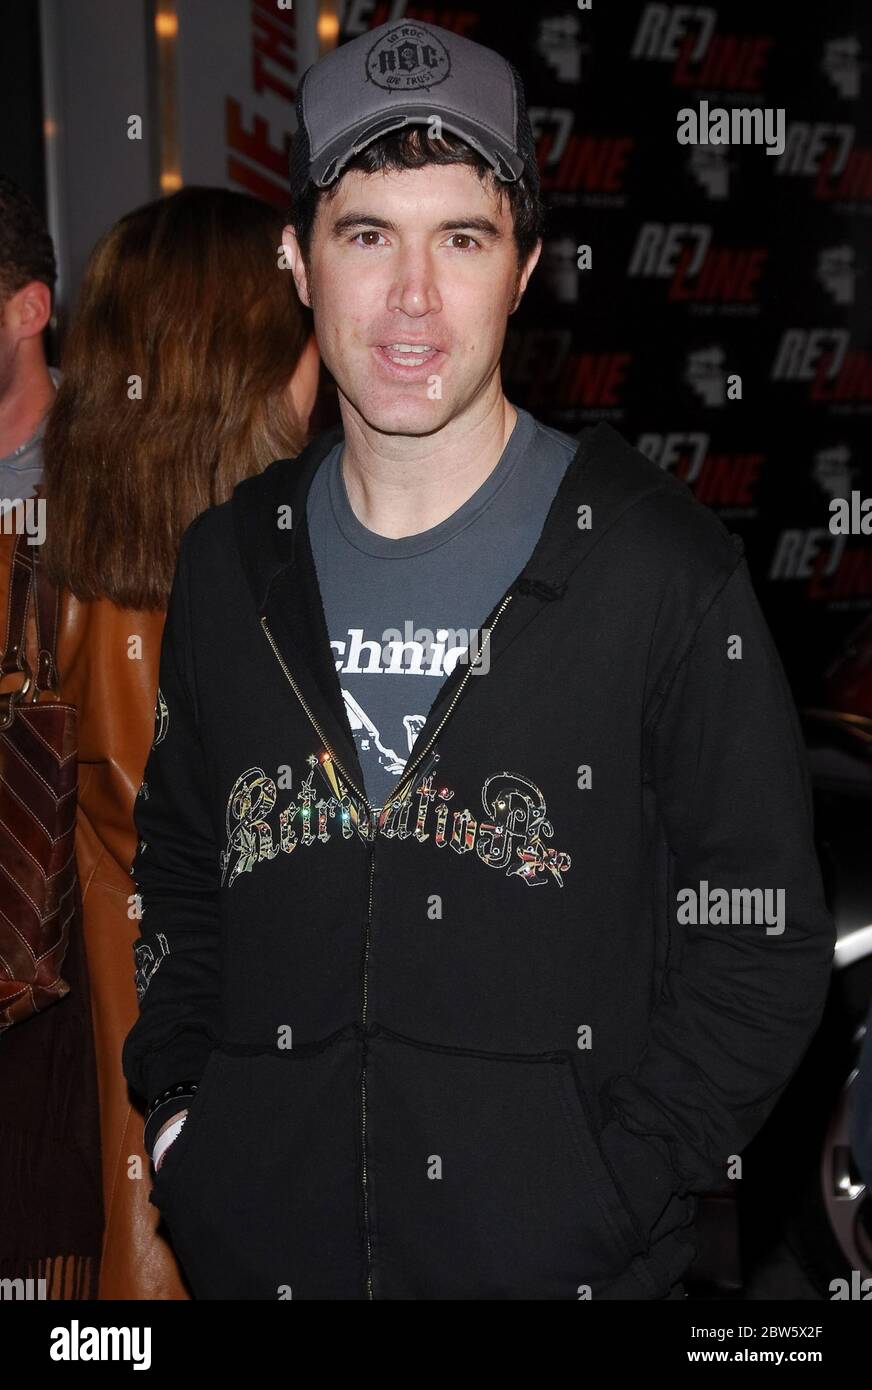 Tom Anderson, creater/owner of Myspace.com at the "Redline The Movie"  Presents Wycleaf Jean & The Refugees All-Stars Sponsored by MySpace.com  held at the House Of Blues on Sunset in Hollywood, CA. The